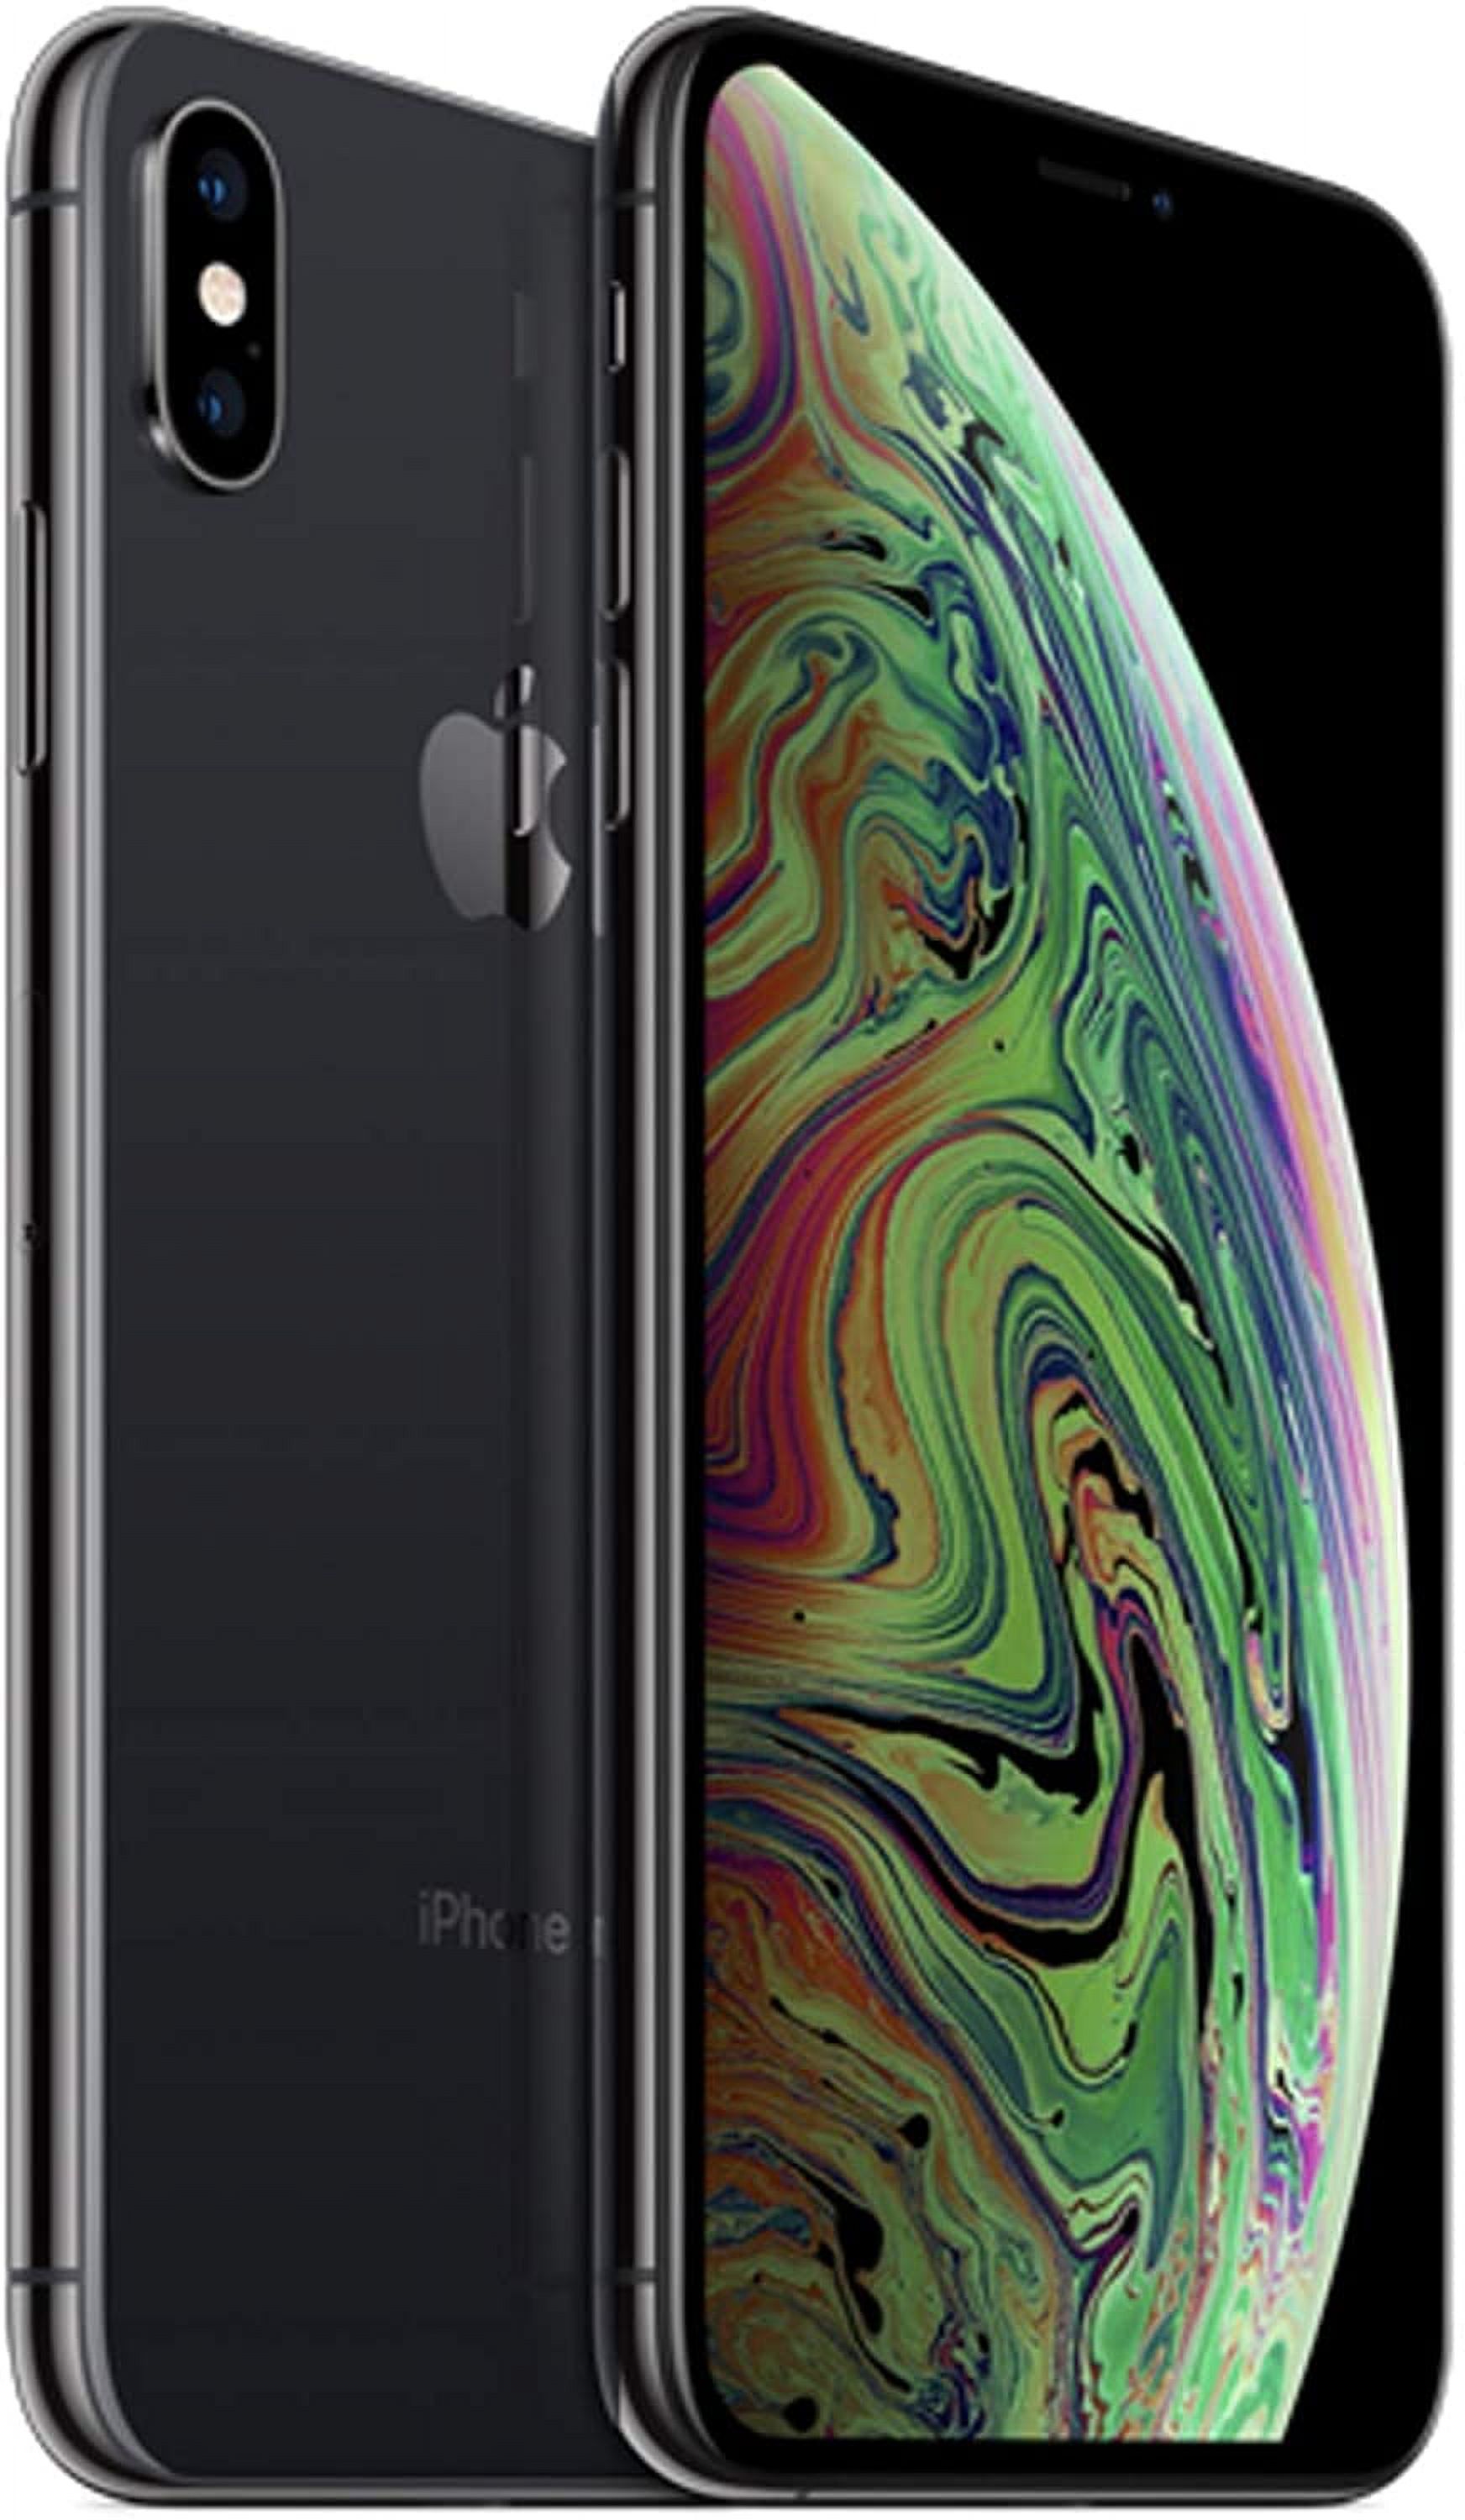 Pre-Owned Apple iPhone XS Max Fully Unlocked, Space Gray 256gb (Refurbished: Fair) - image 1 of 5